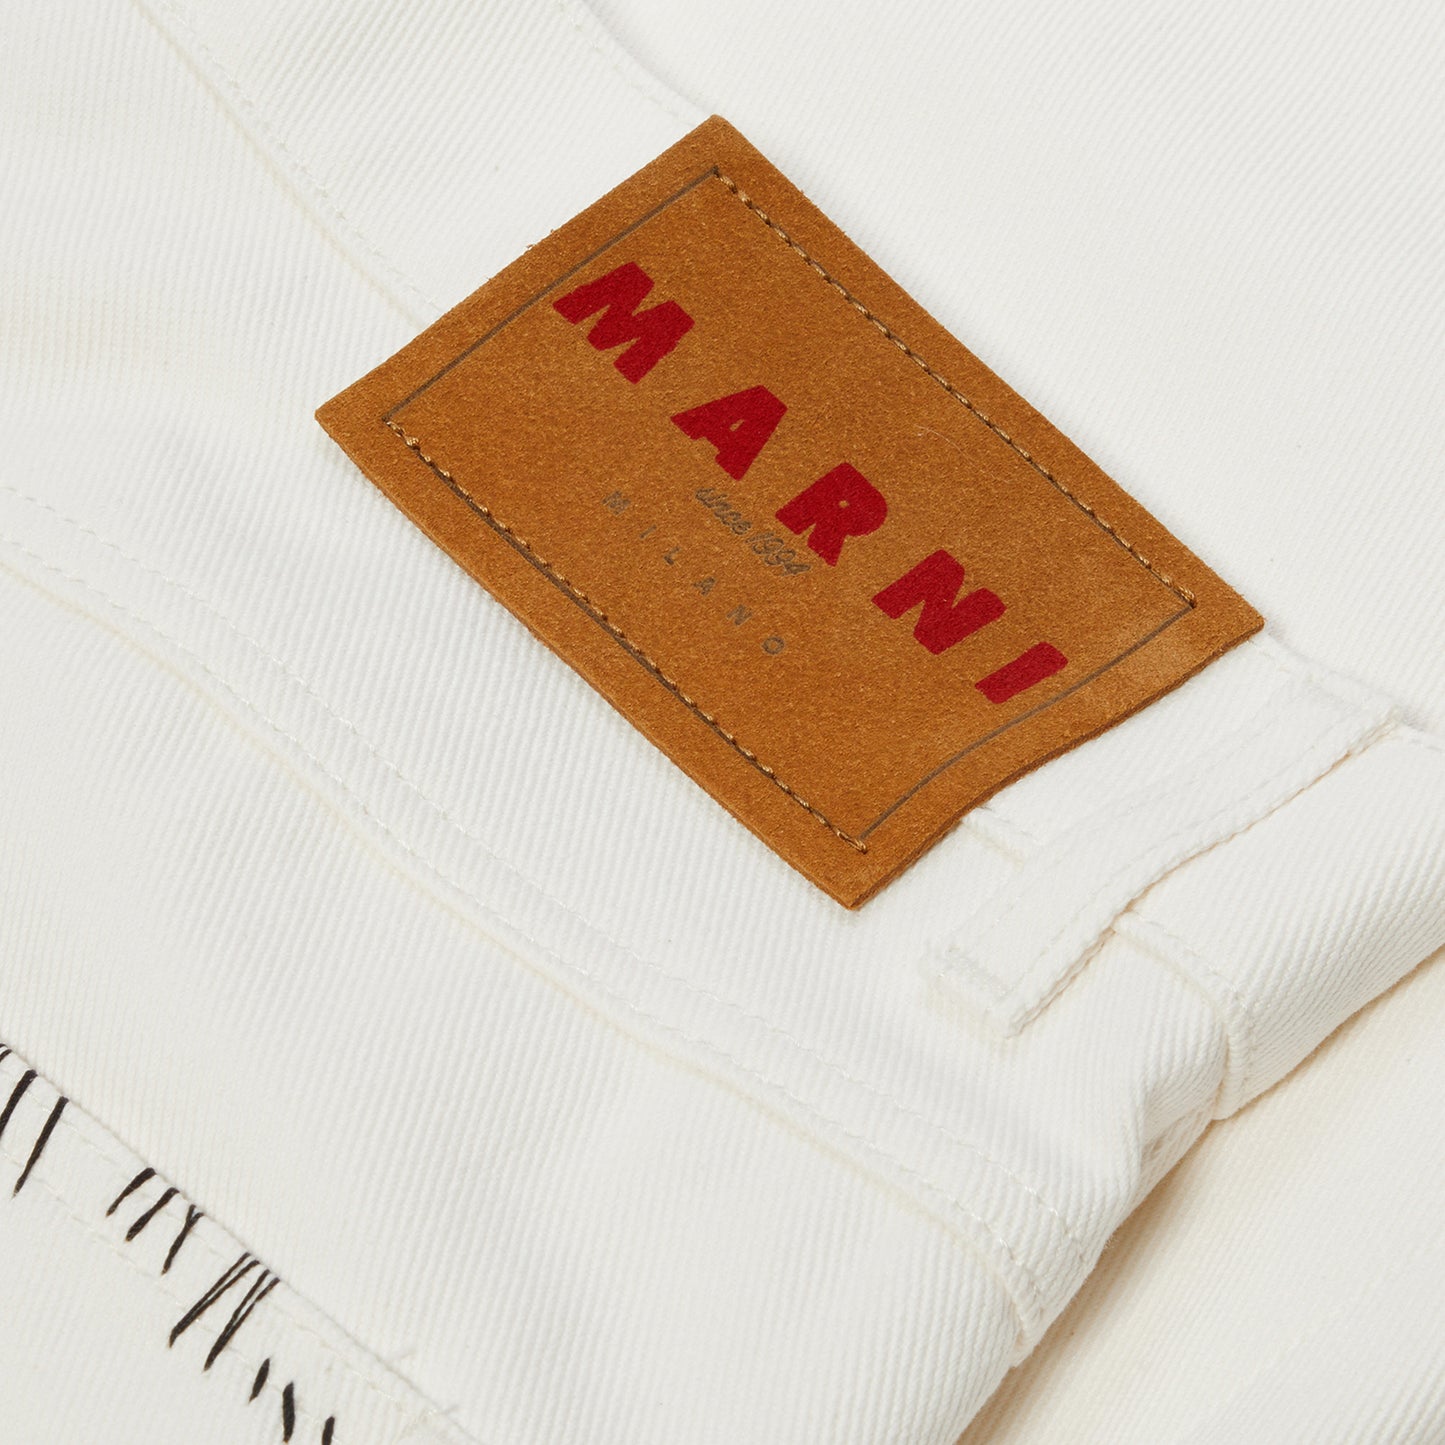 MARNI Trousers (Lily White)